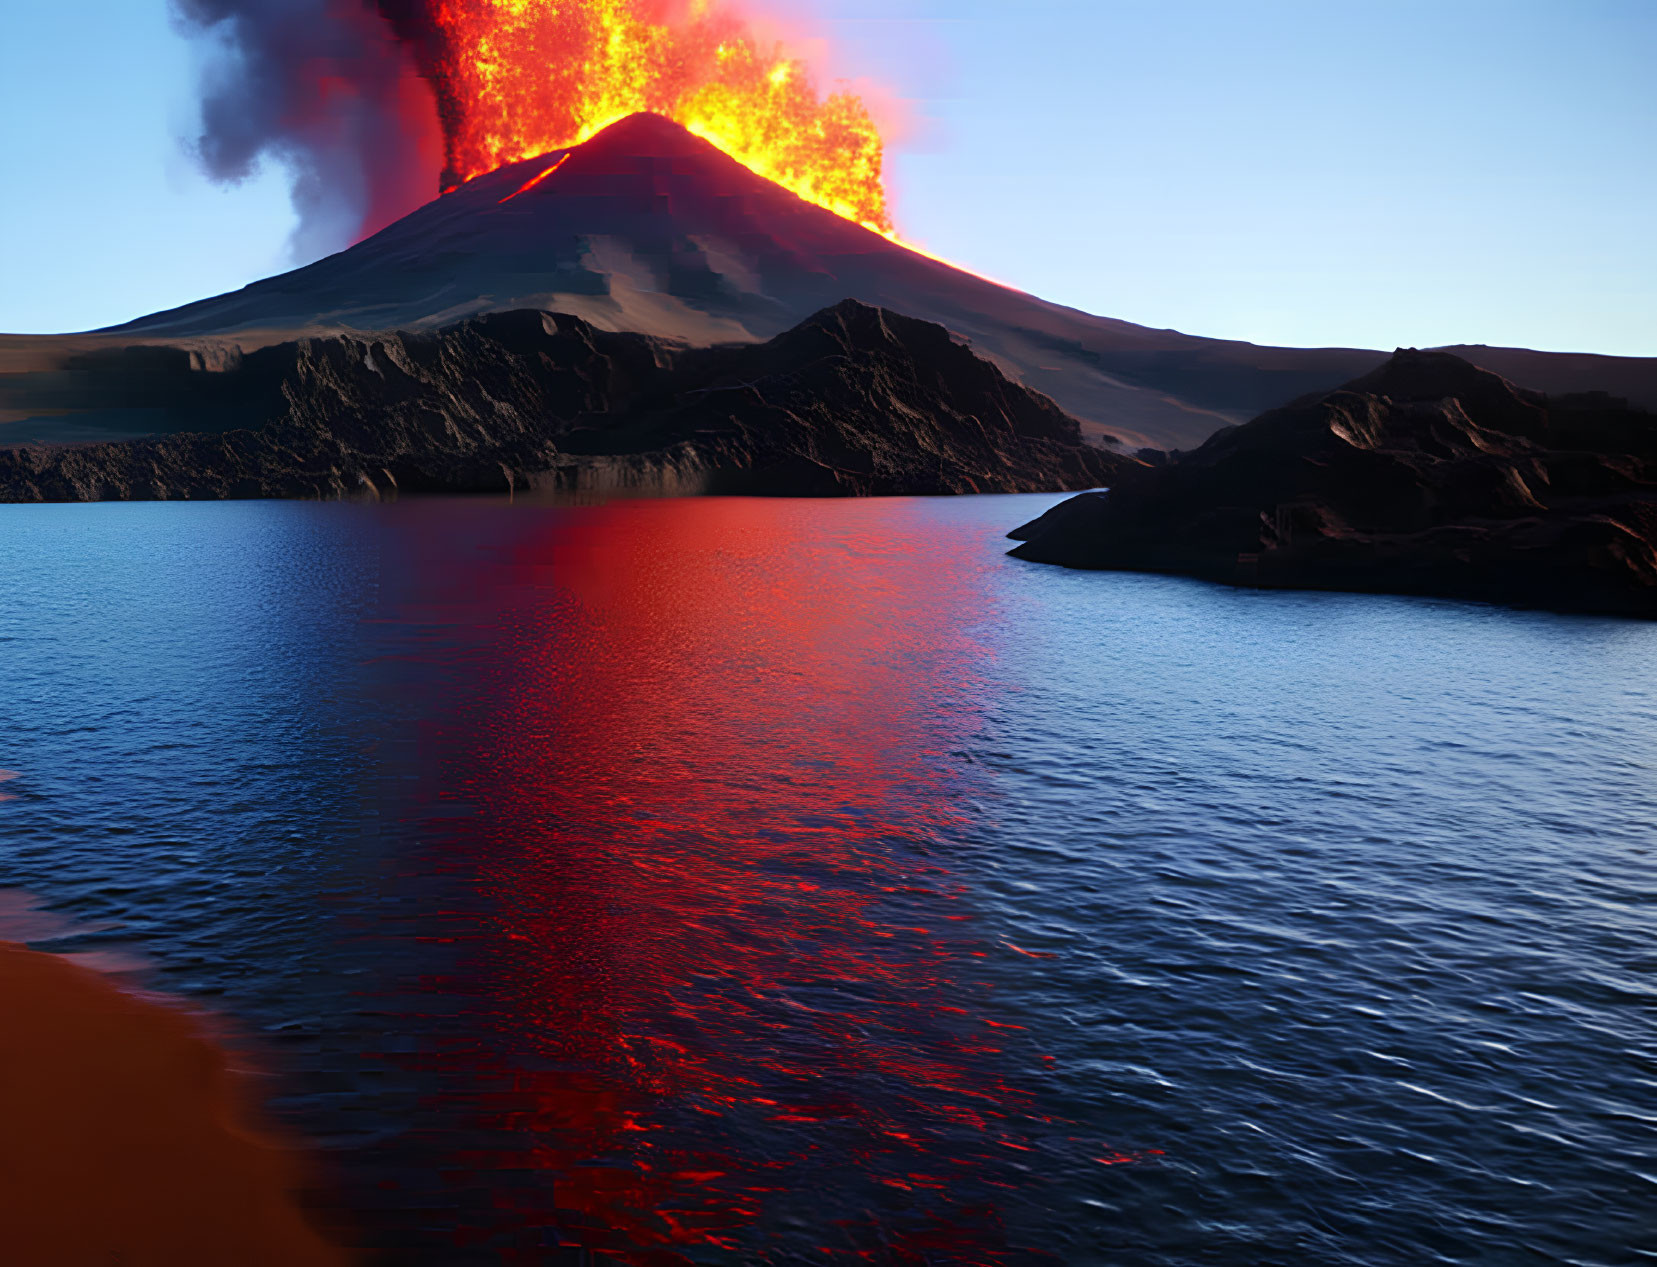 Twilight volcanic eruption with lava flowing into water